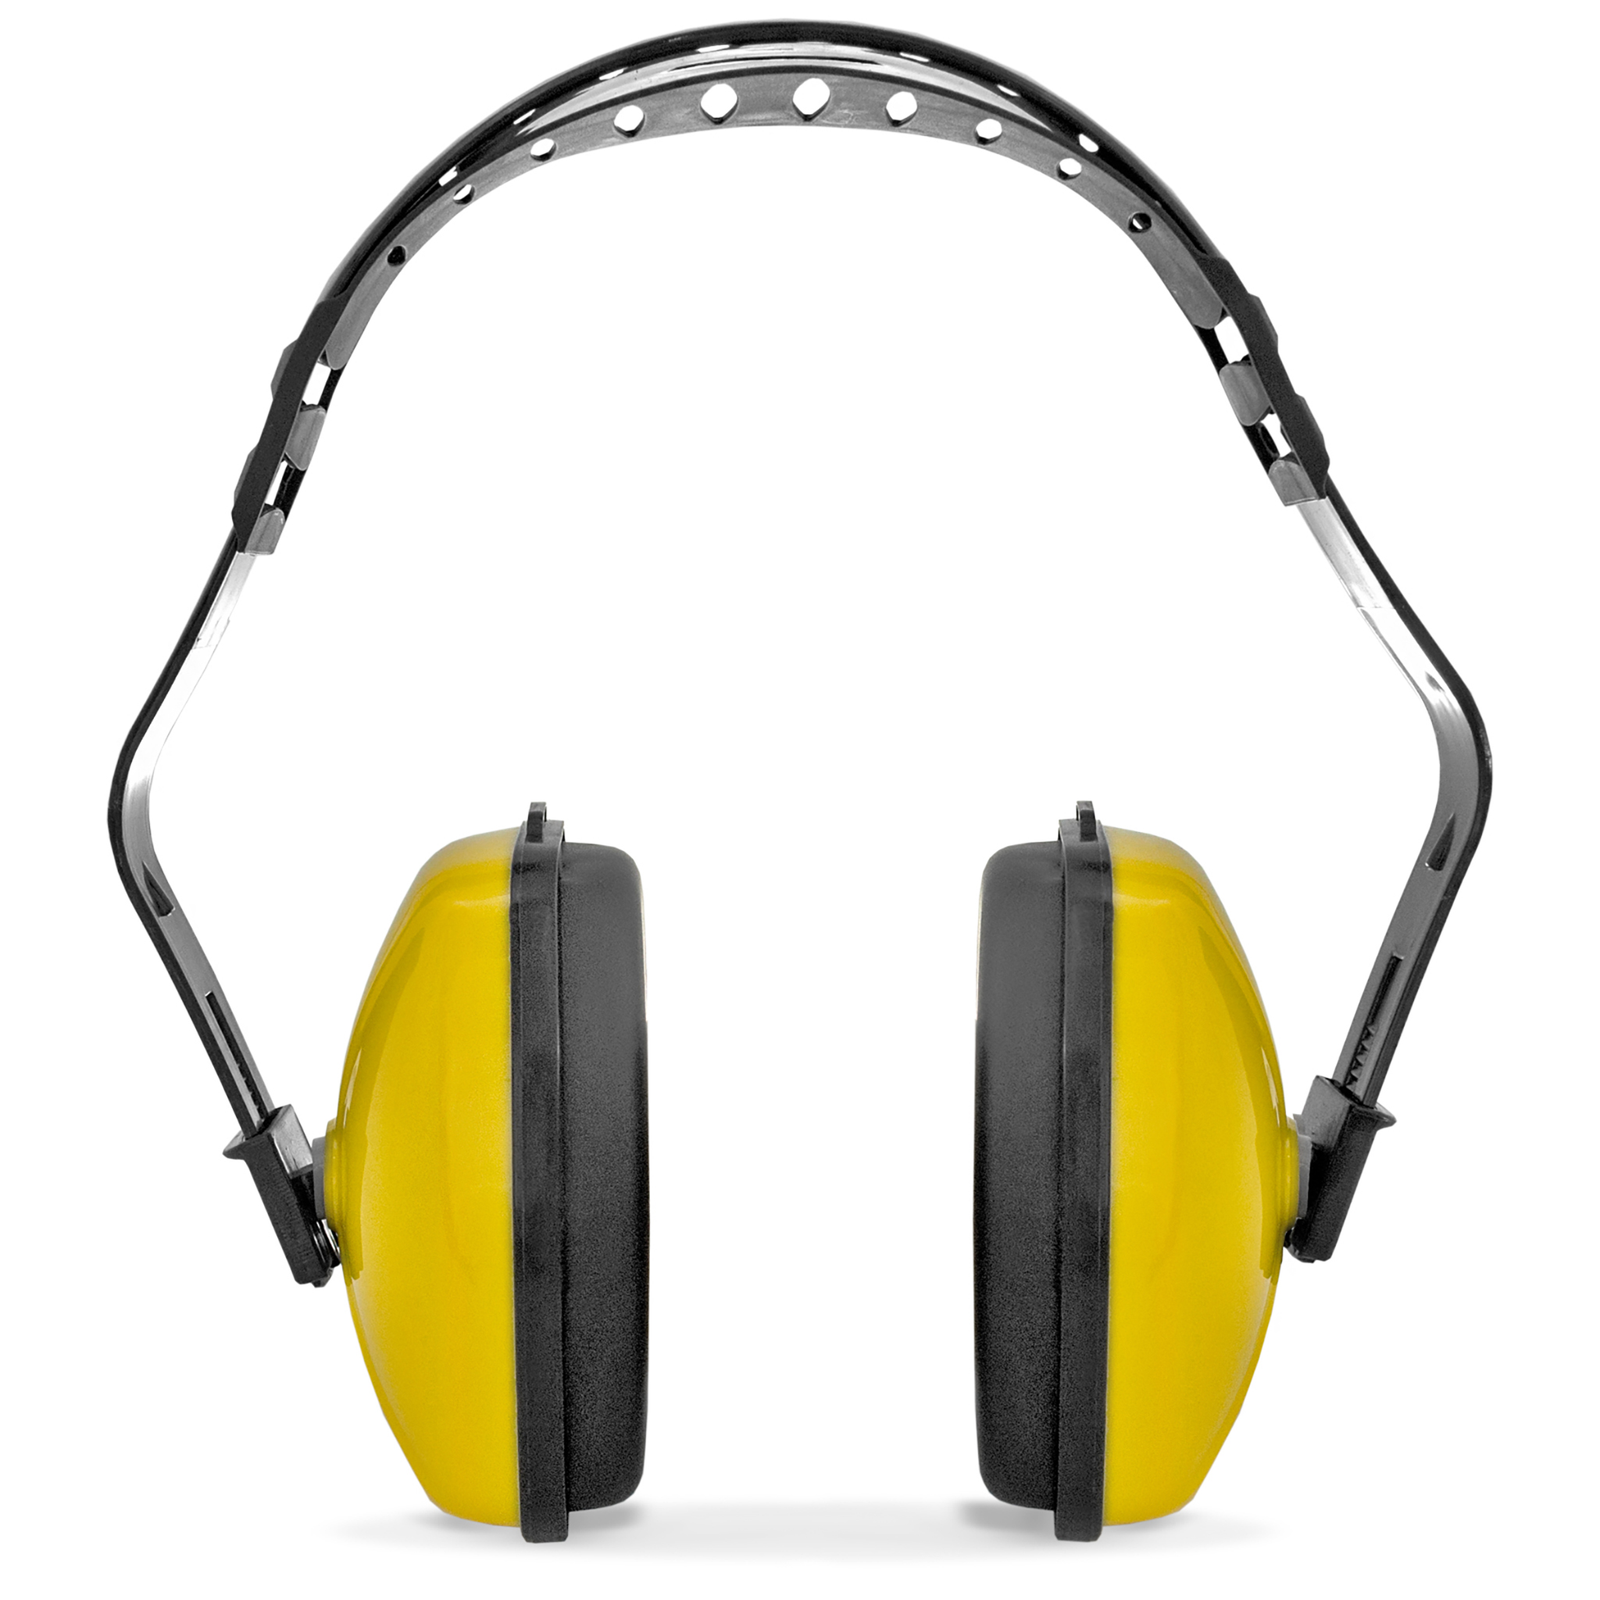 Front view of the yellow and black 23 NRR noise reduction JORESTECH ear muff for hearing protection